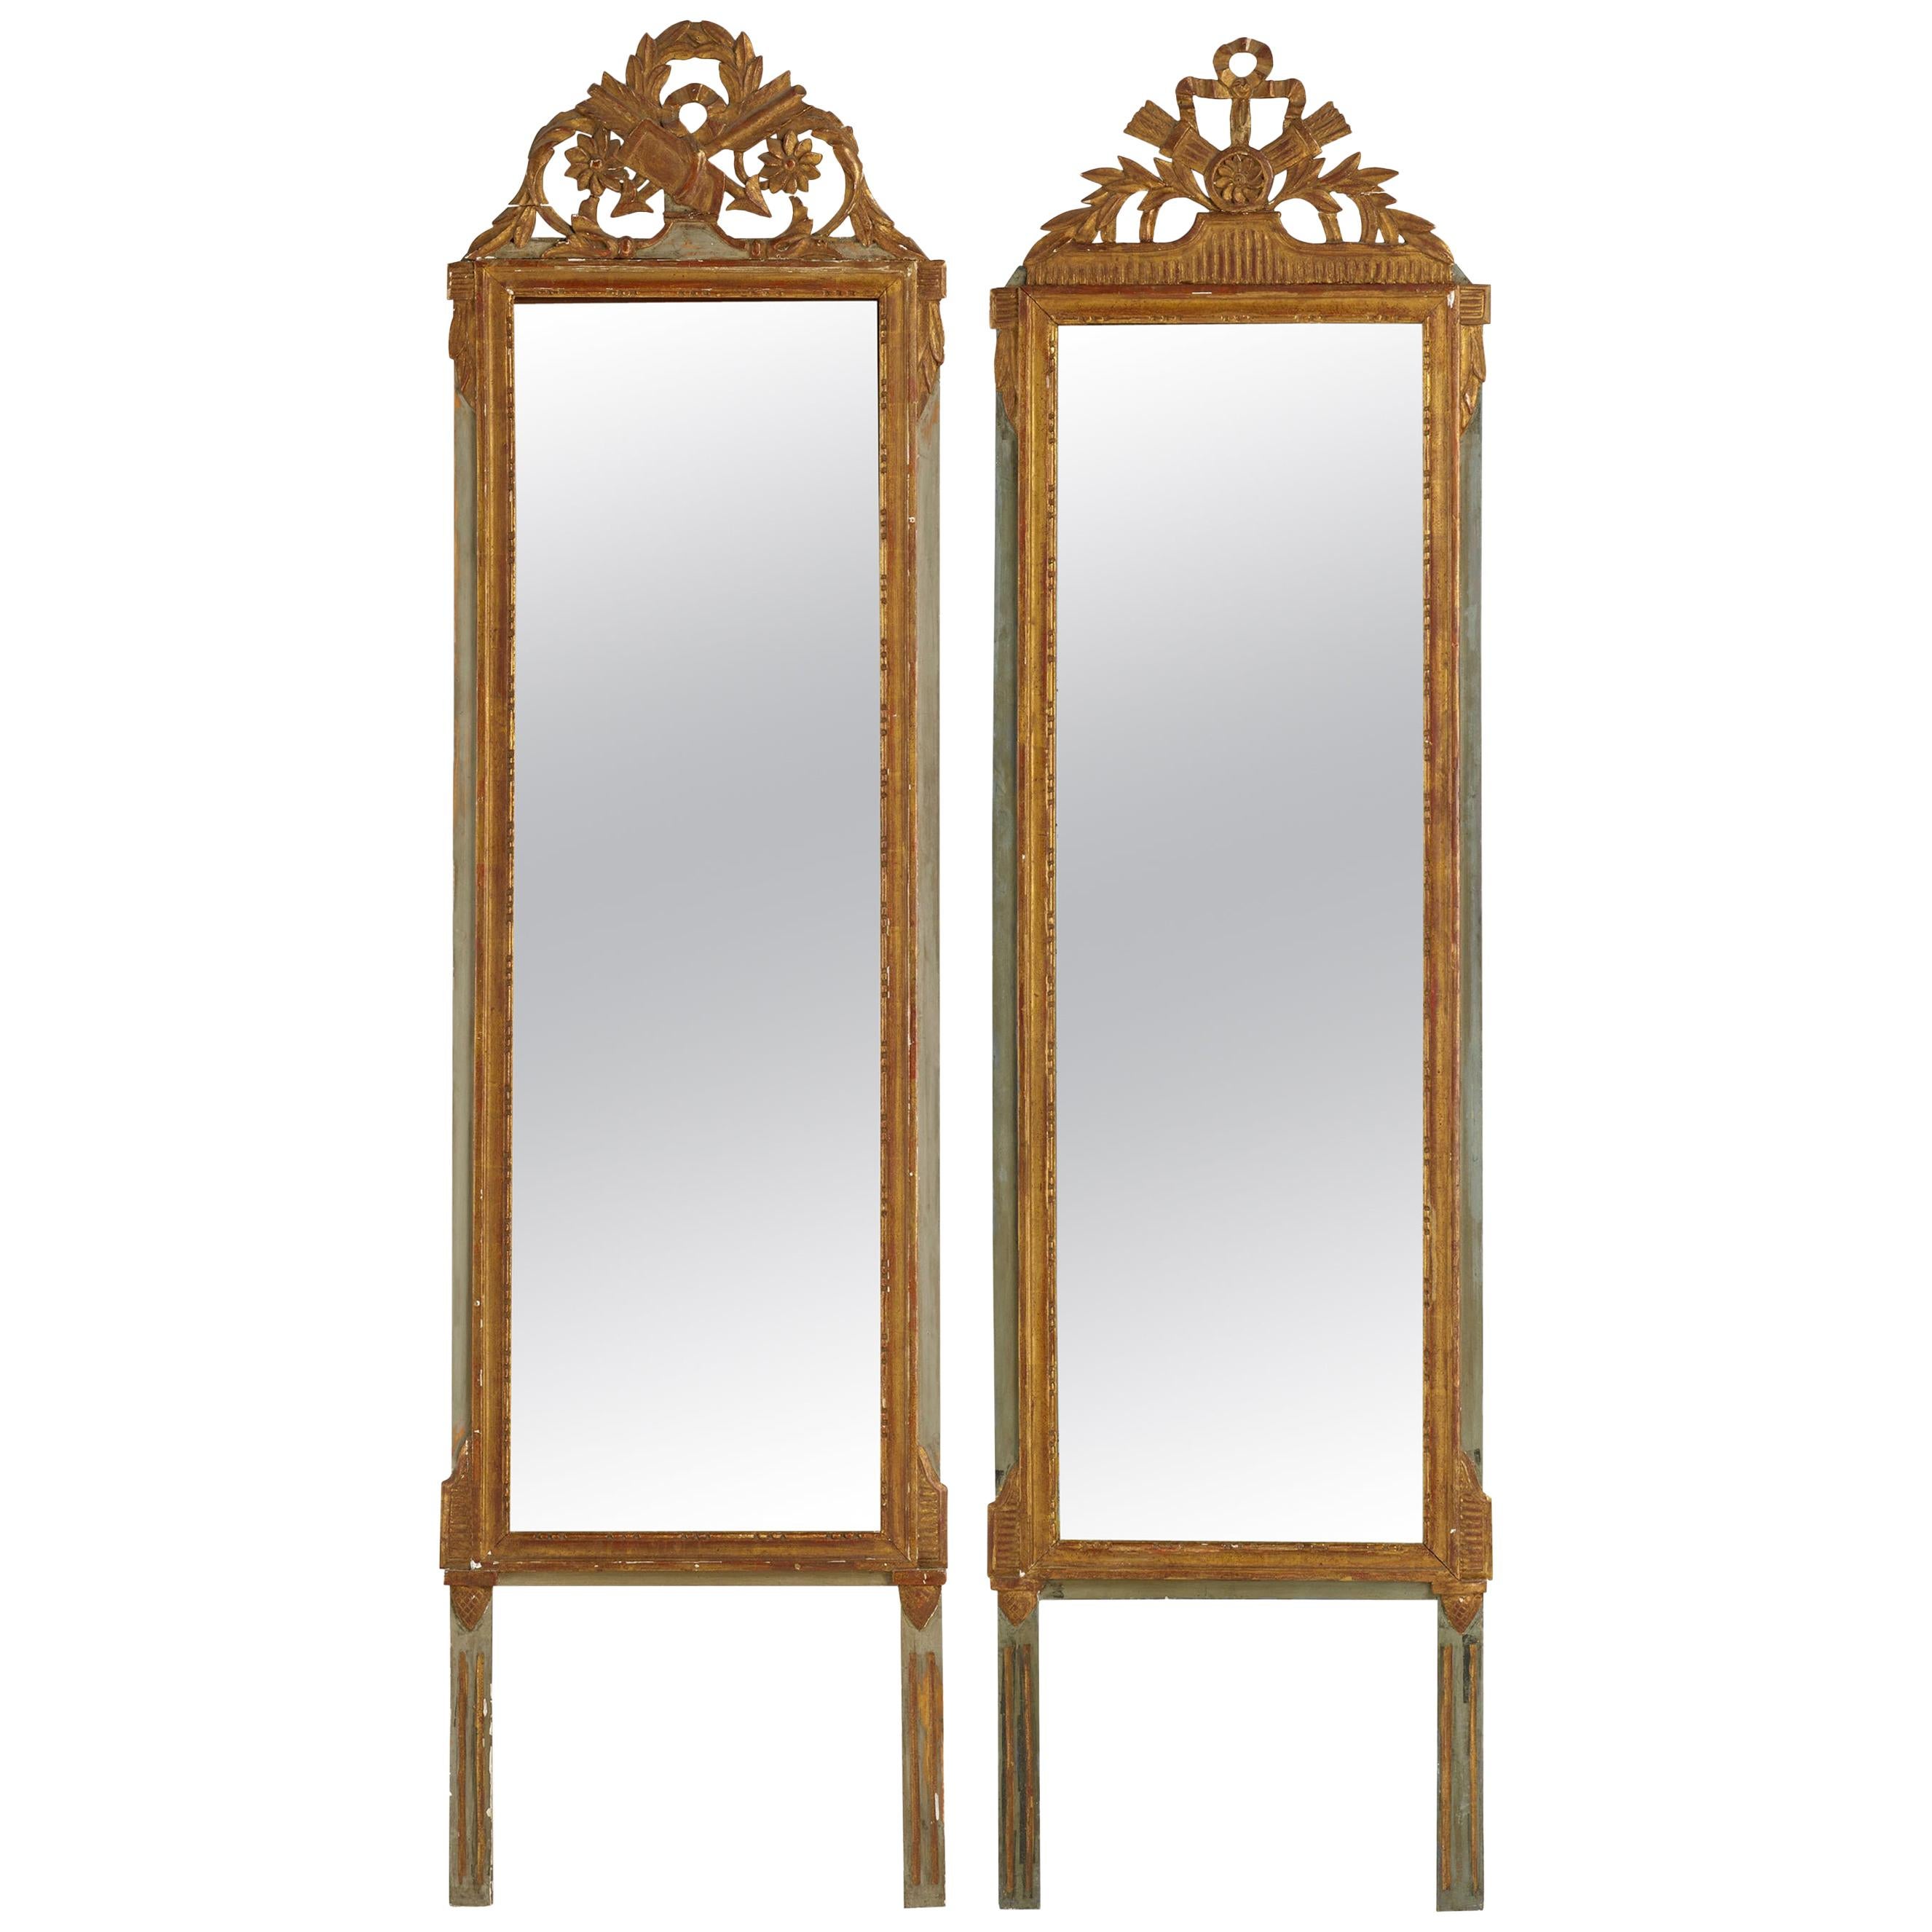 Louis XVI Carved Giltwood Pier Wall Mirrors, France